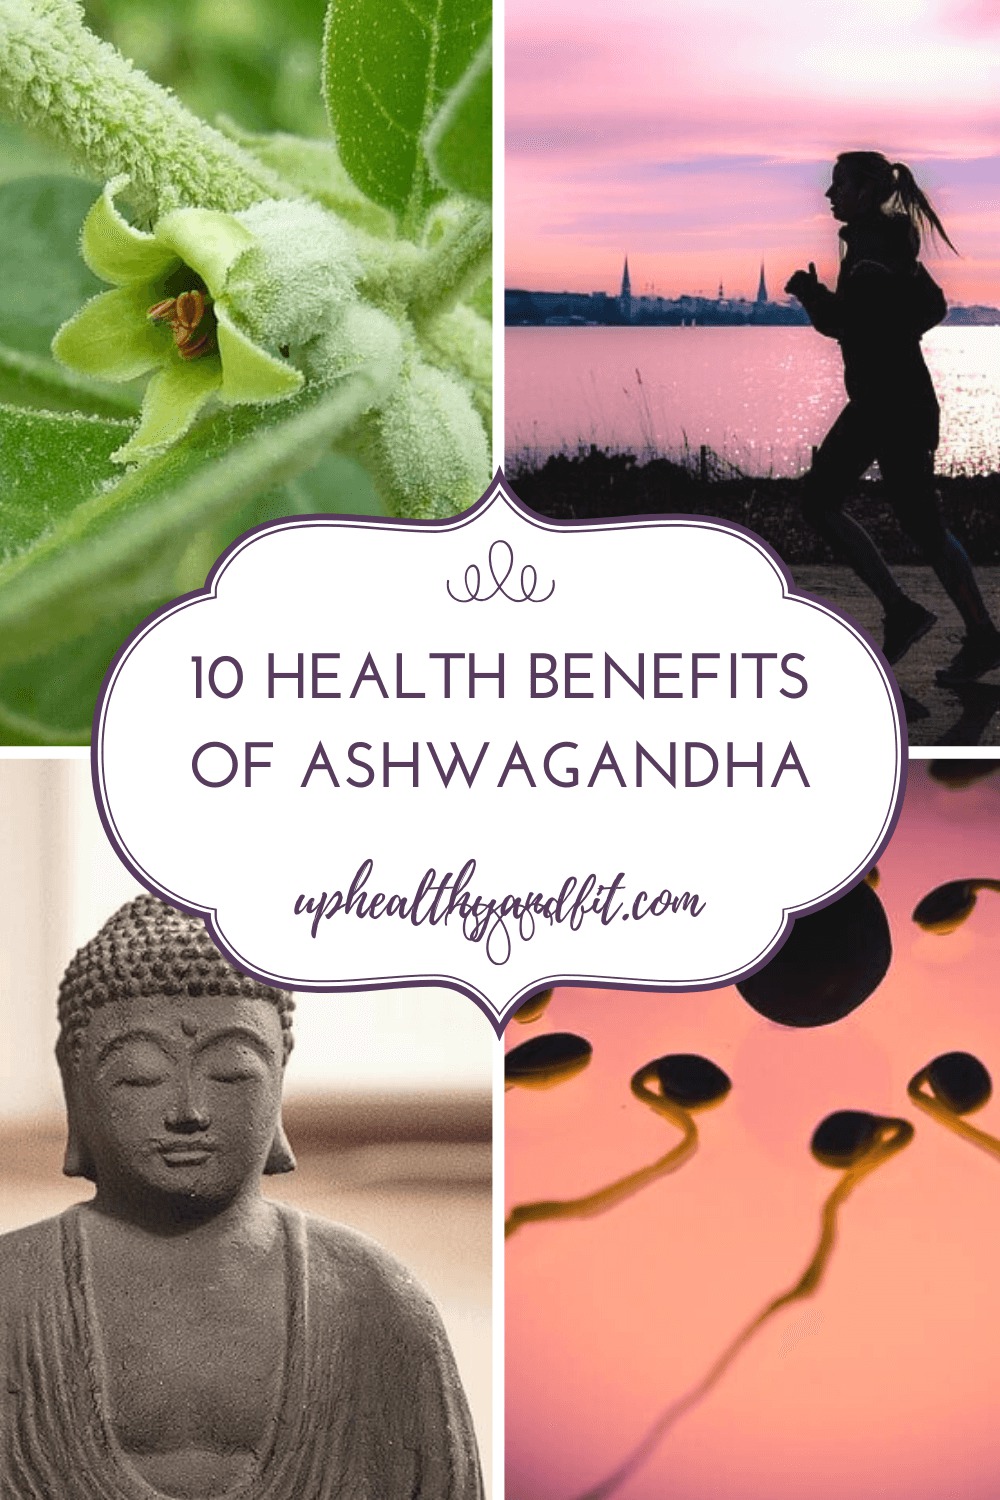 what are the health benefits of ashwagandha